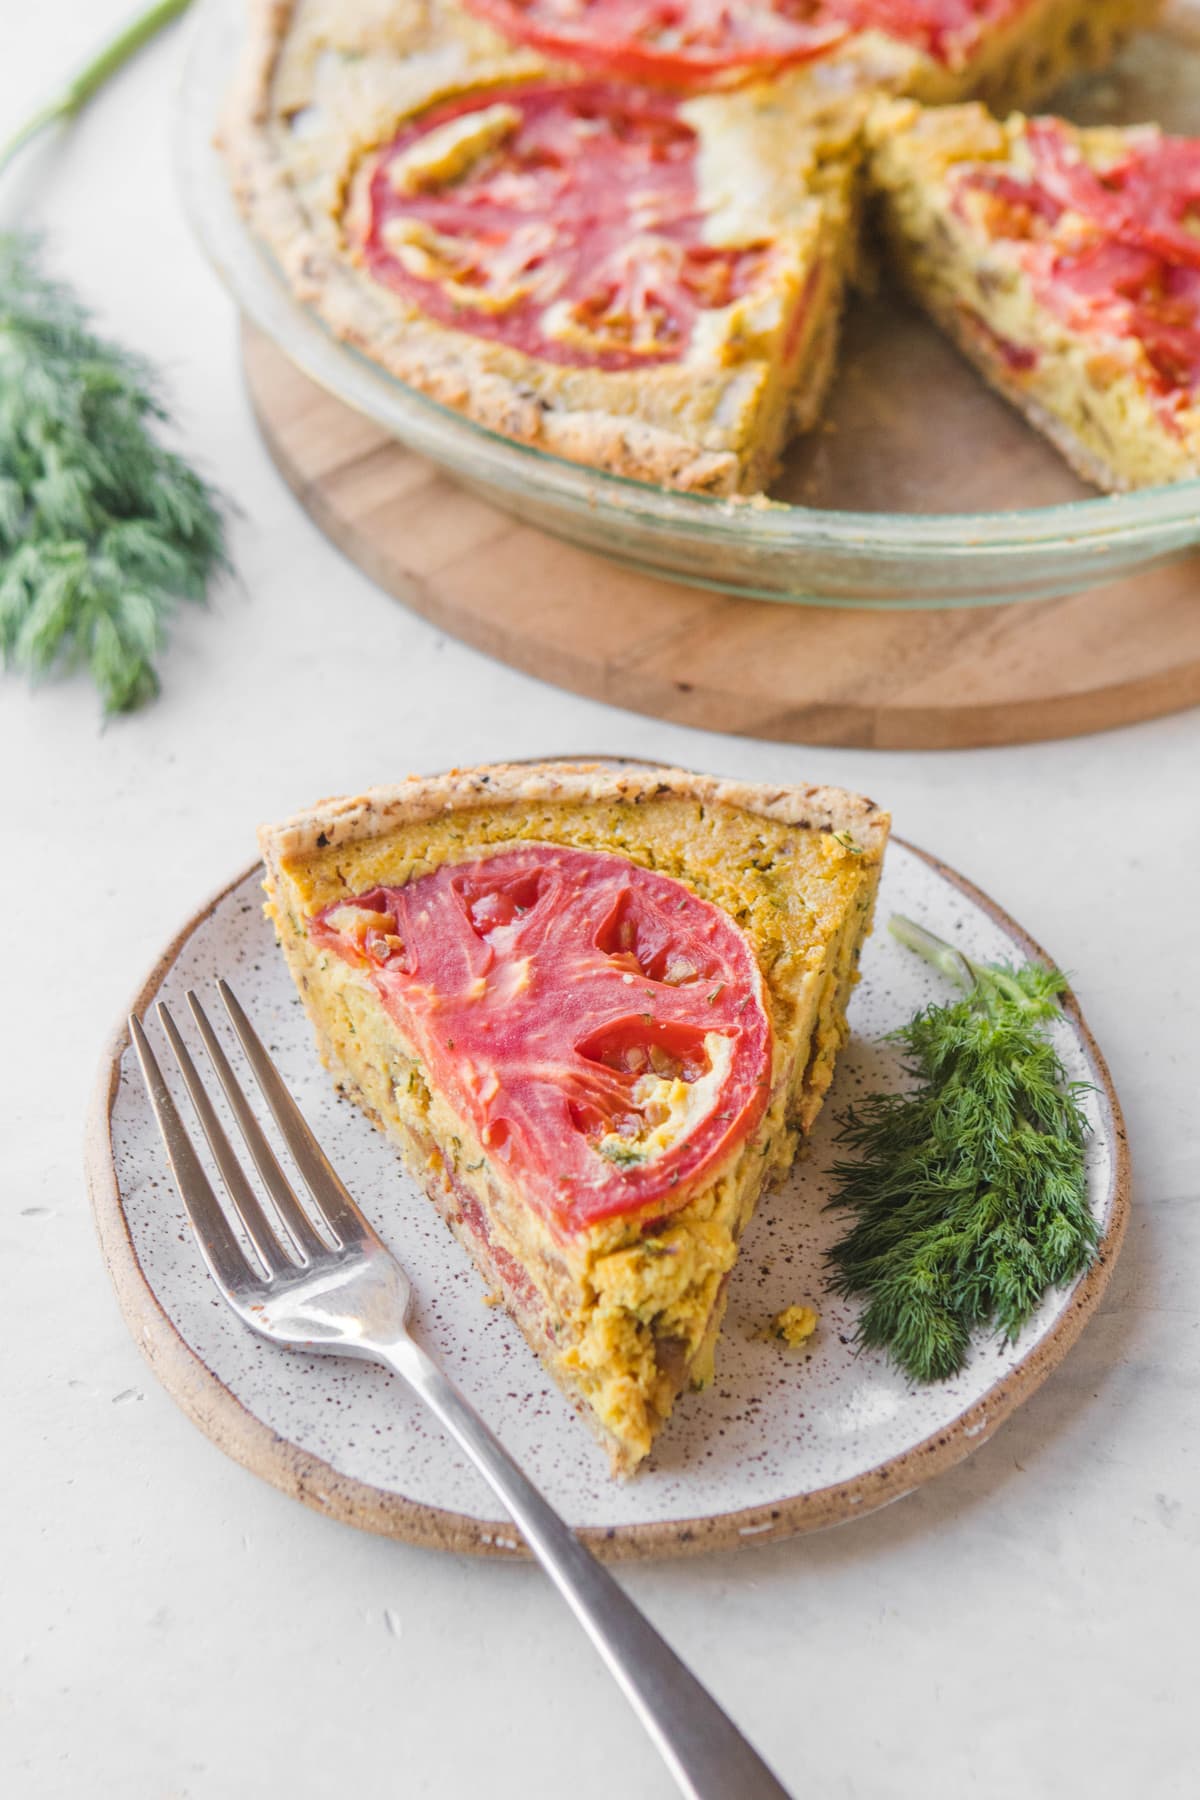 Easy Vegan Quiche Recipe (Gluten + Soy Free) | From My Bowl